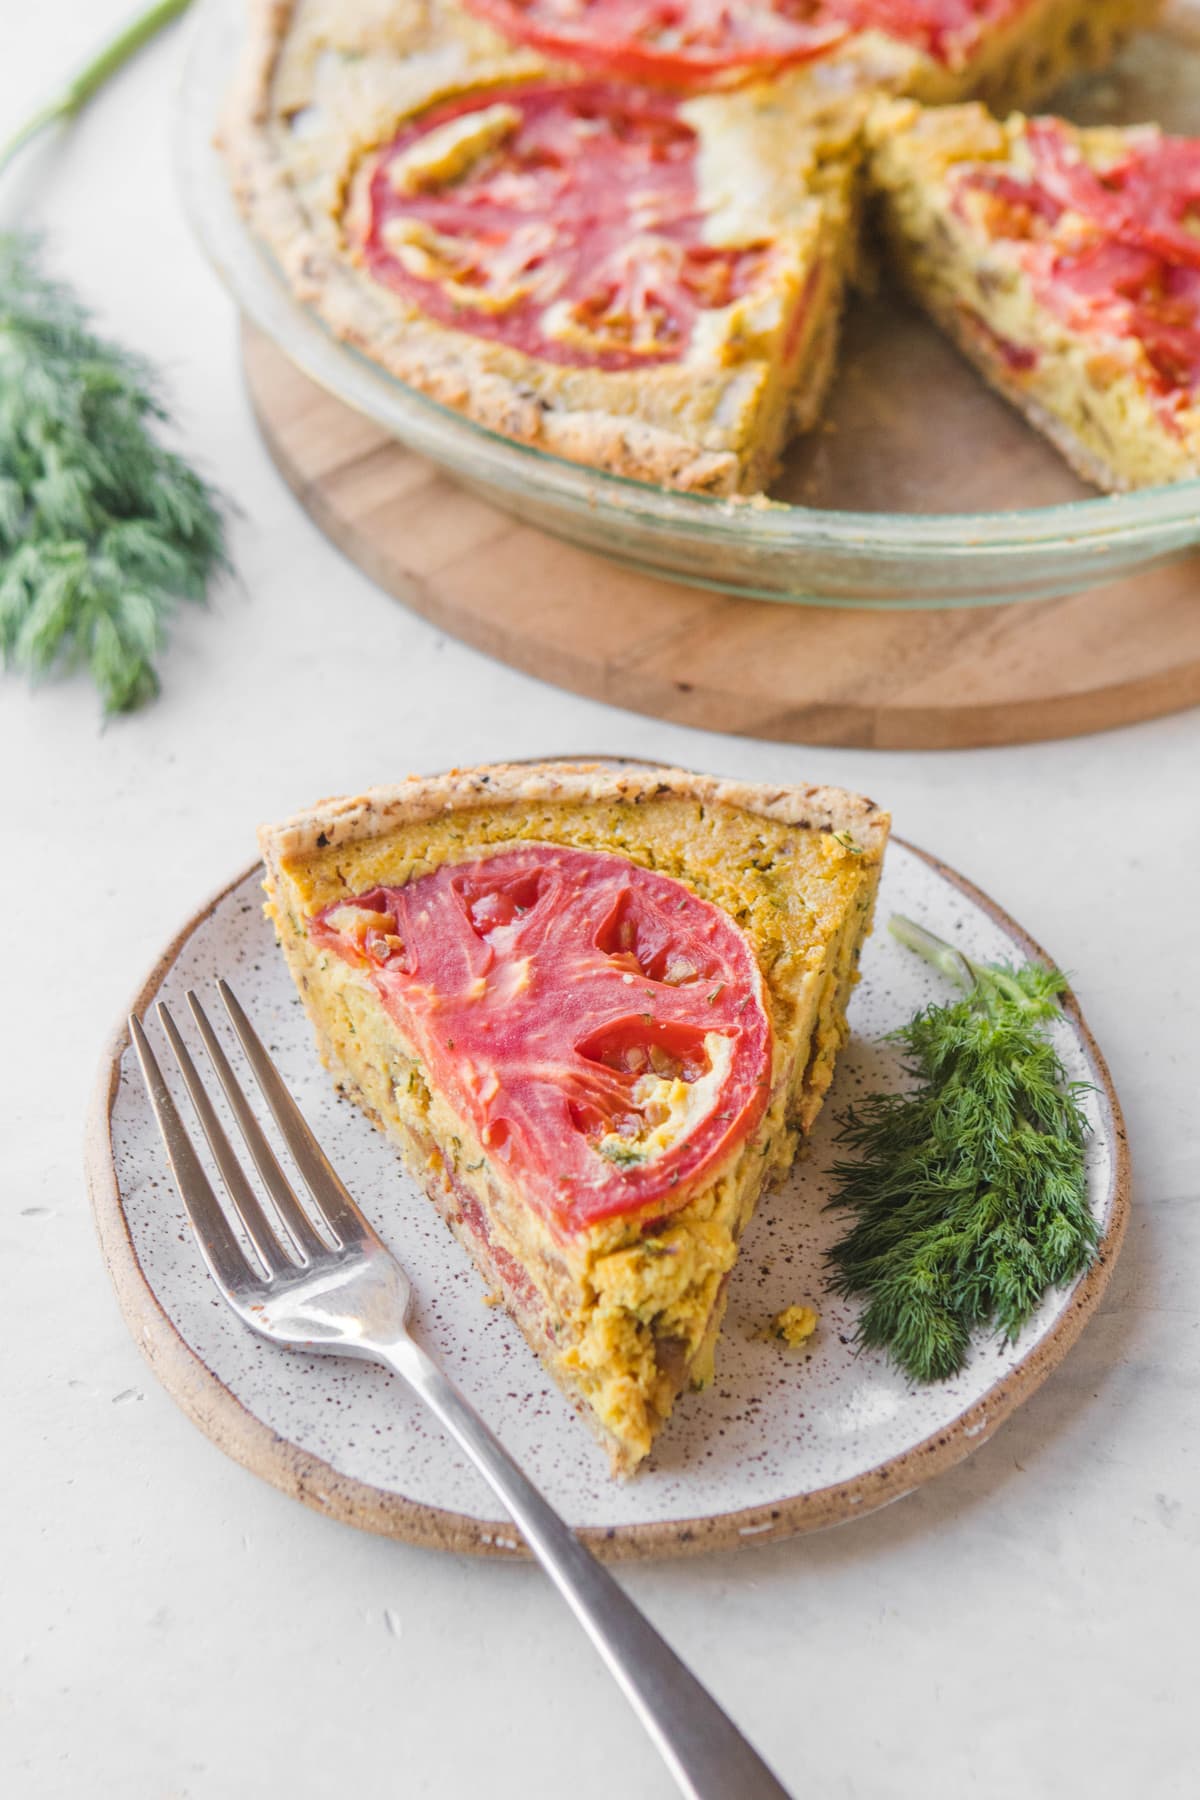 Easy Vegan Quiche Recipe (Gluten + Soy Free) | From My Bowl